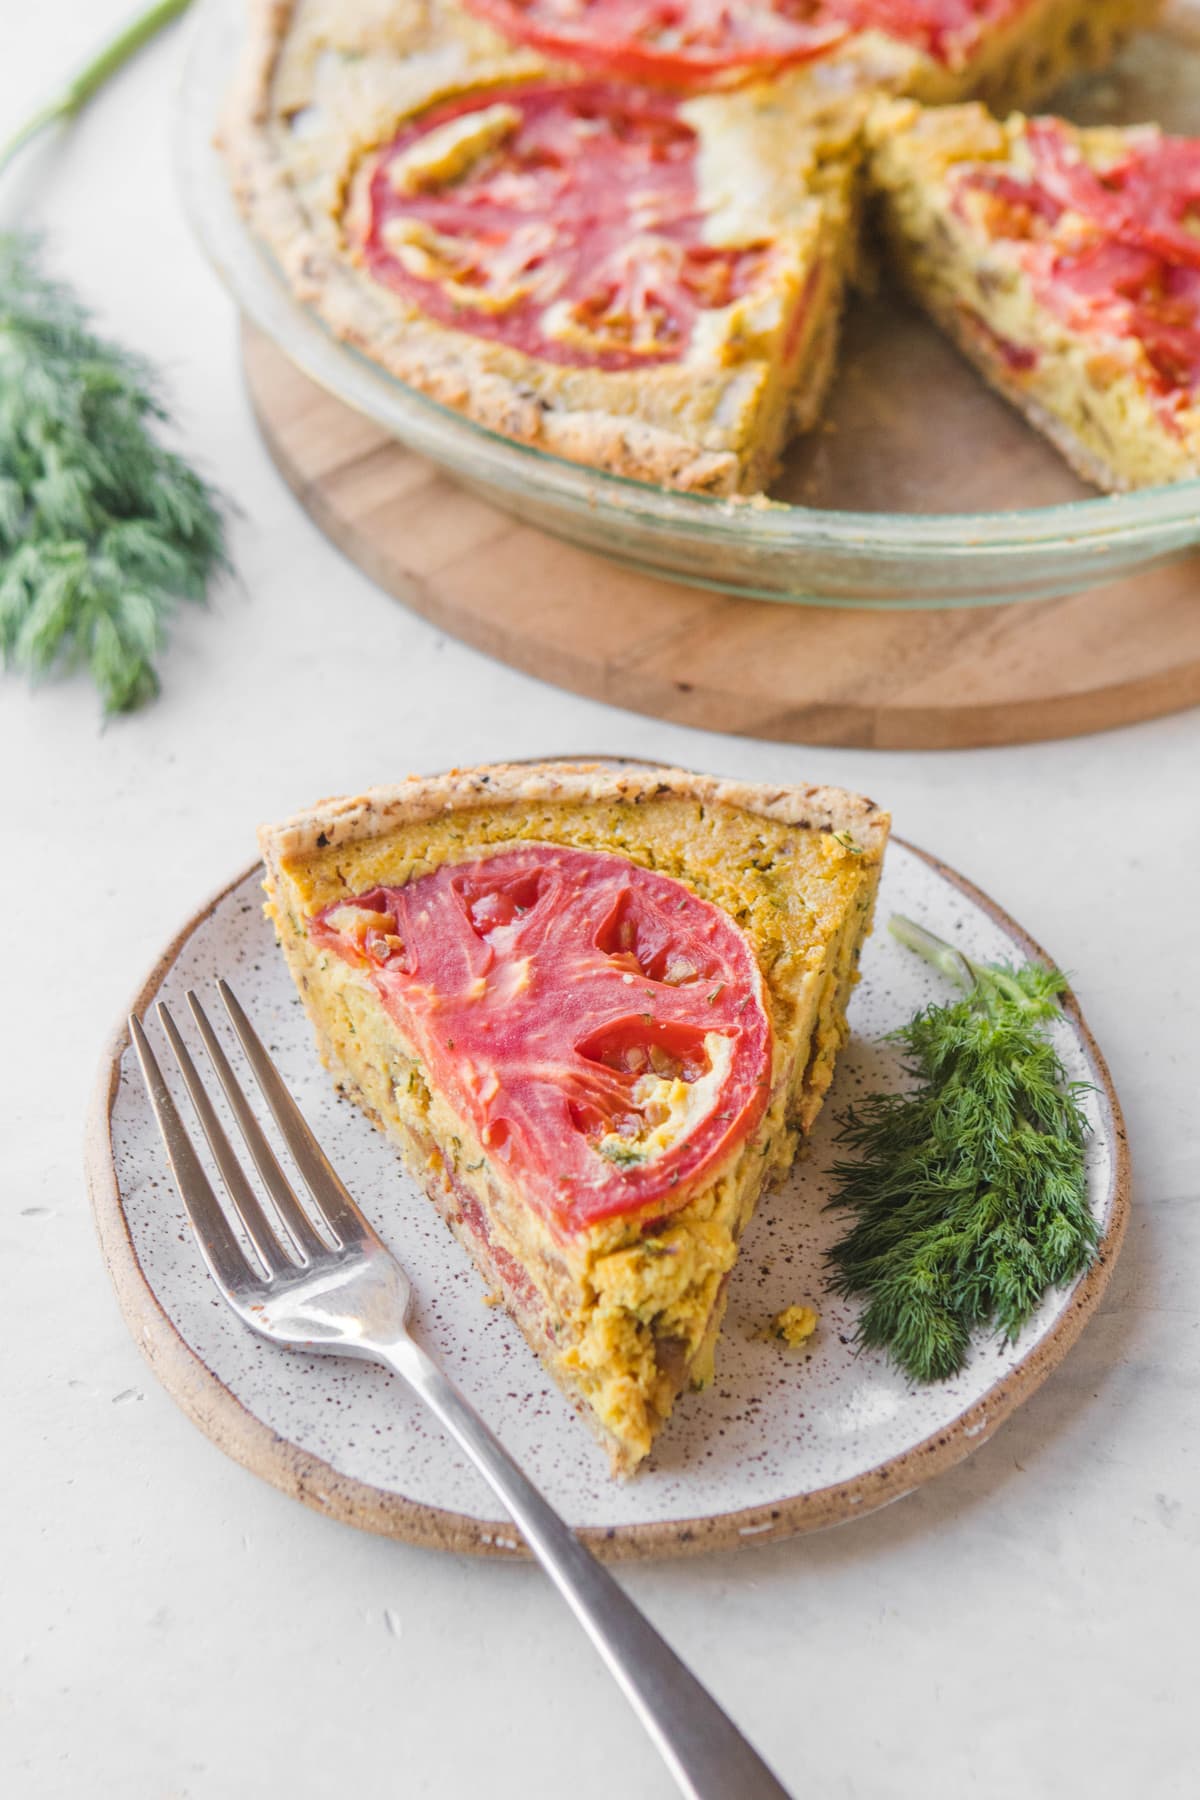 Easy Vegan Quiche Recipe (Gluten + Soy Free) | From My Bowl